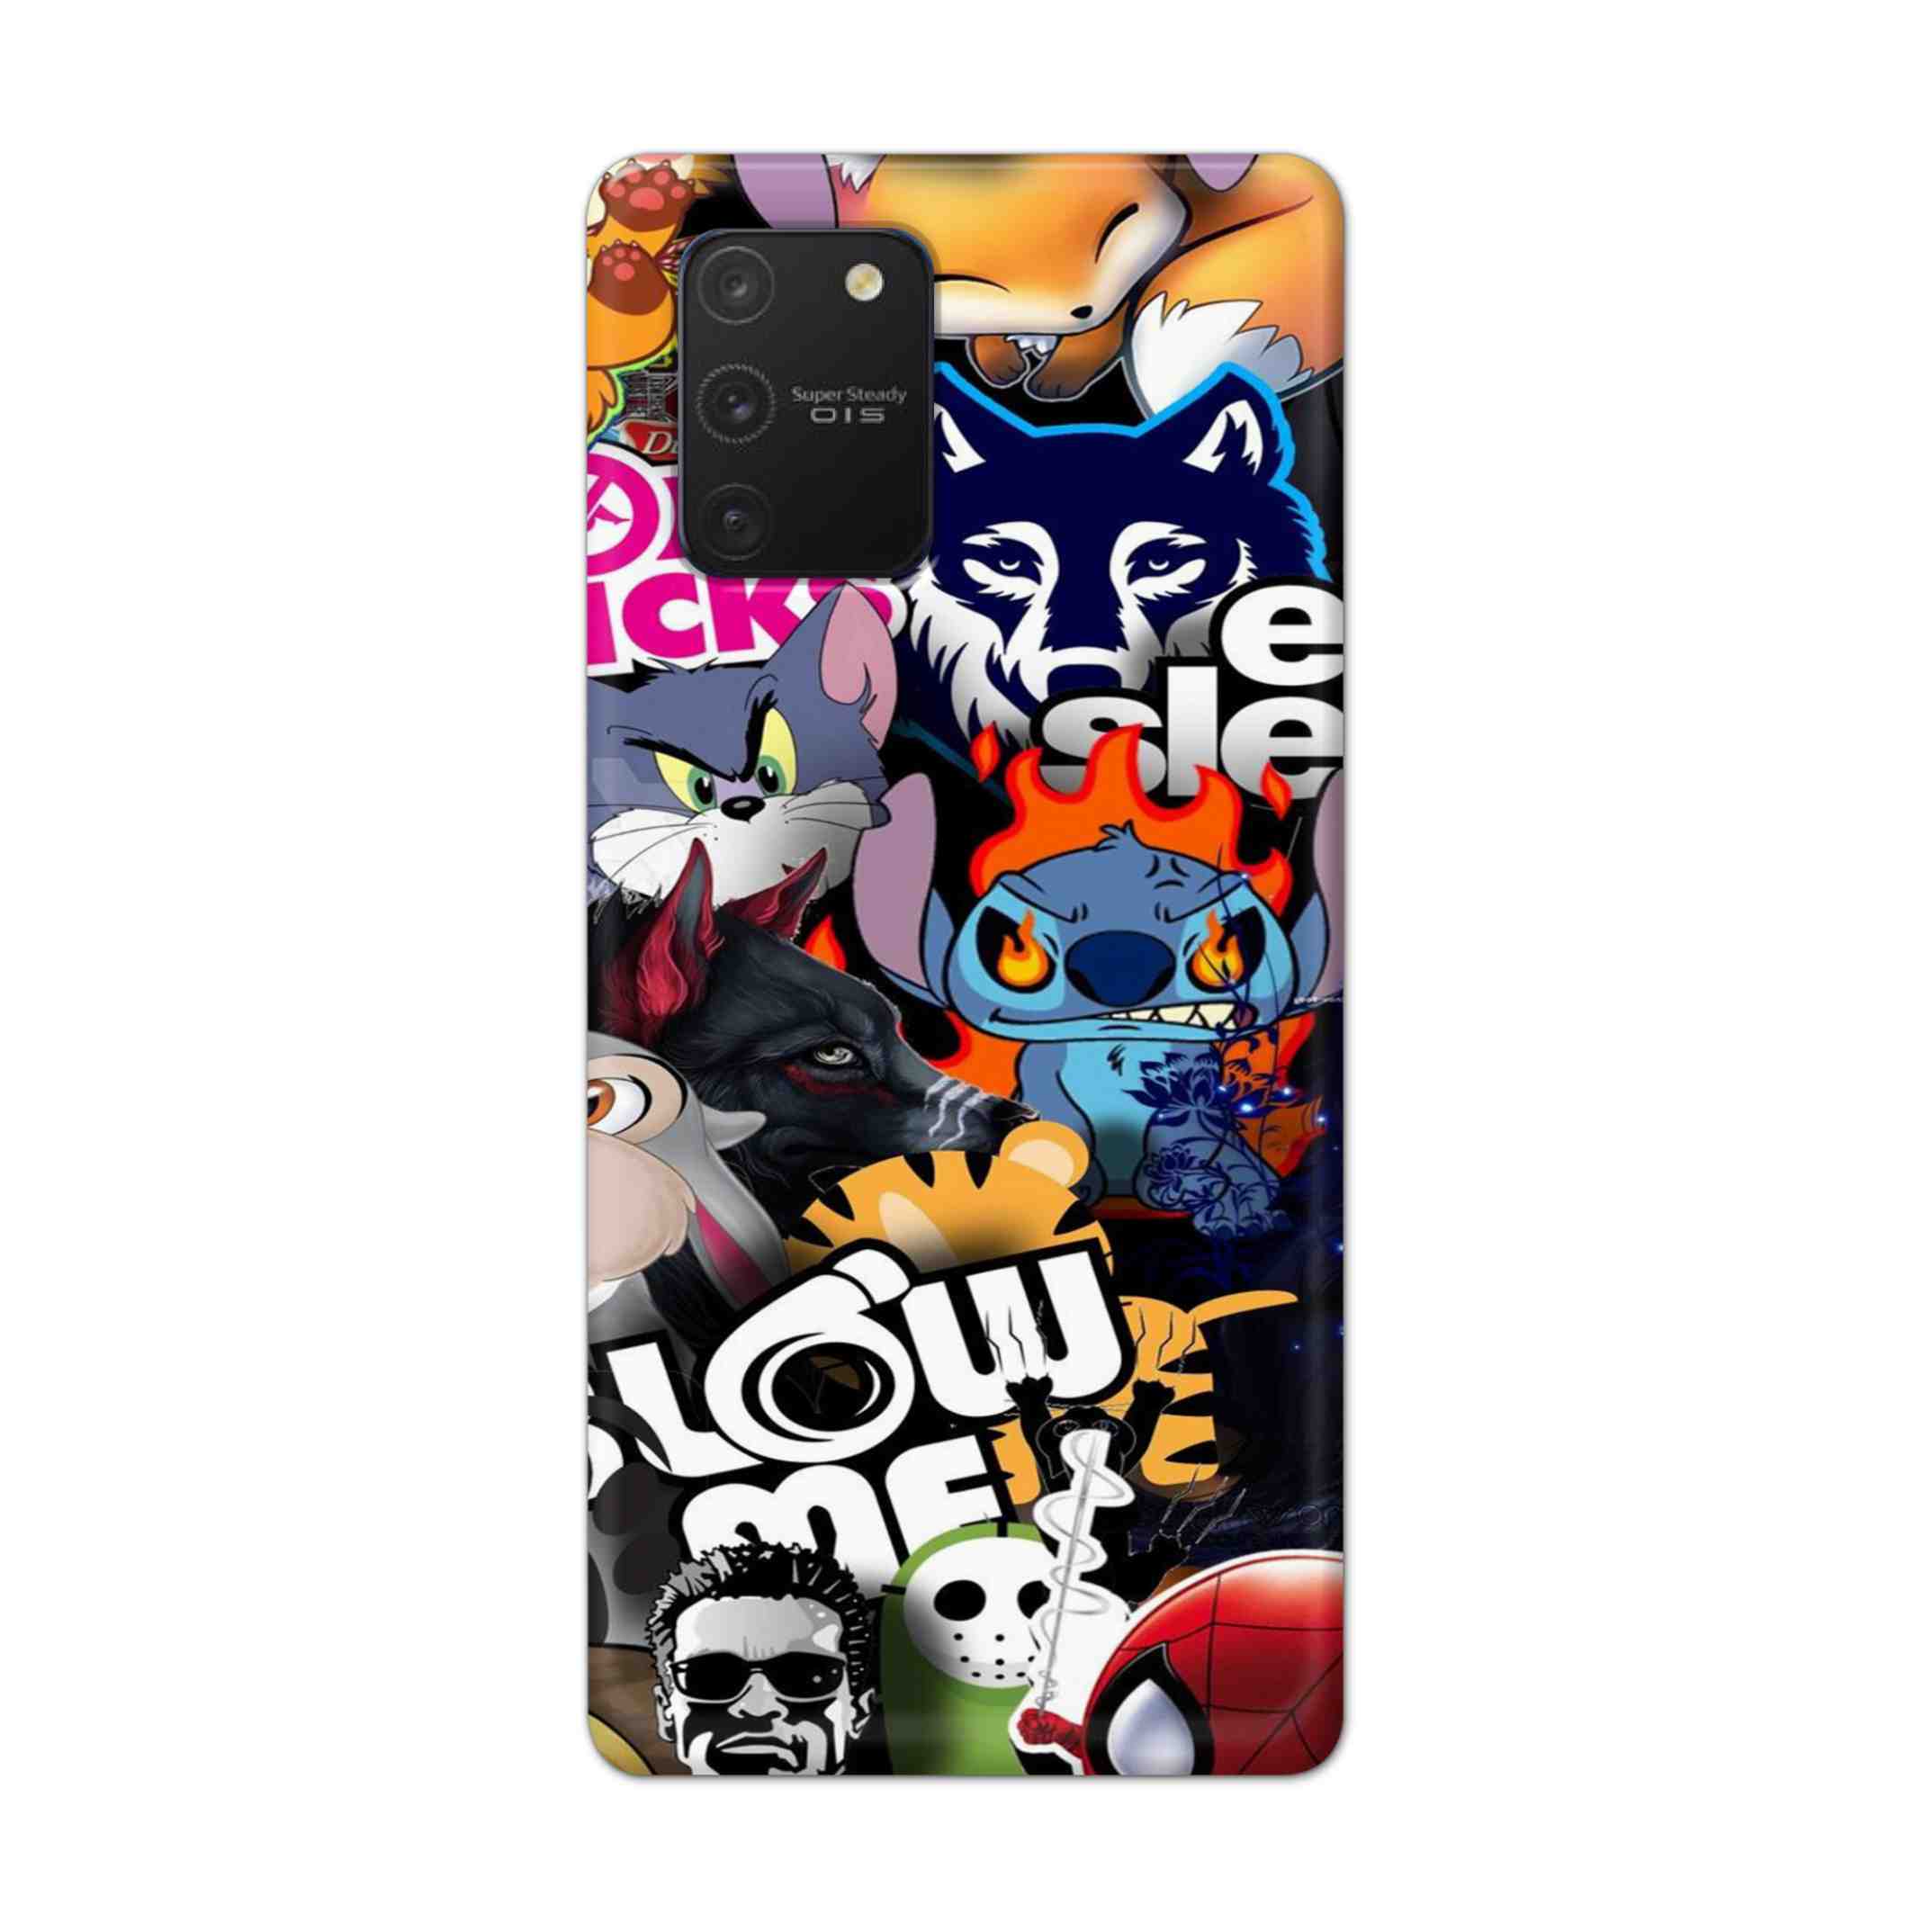 Buy Blow Me Hard Back Mobile Phone Case Cover For Samsung Galaxy S10 Lite Online